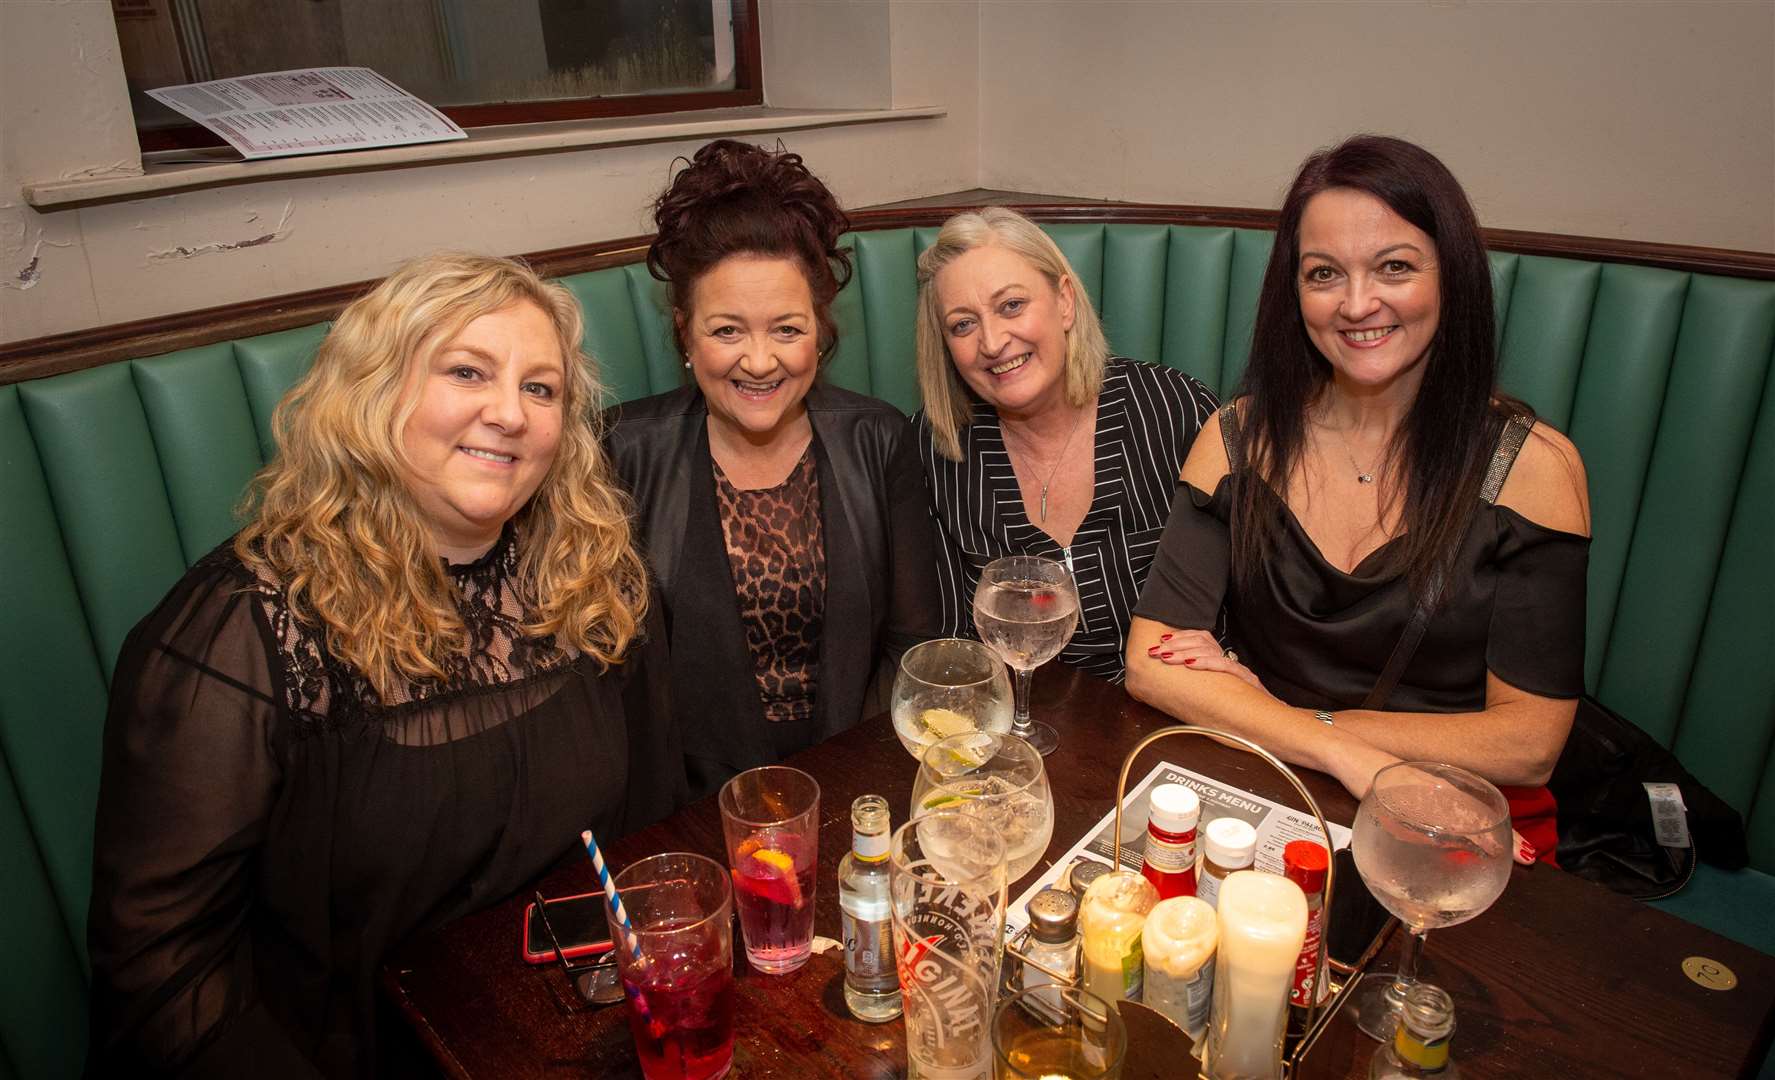 Girls night out for Carol Urquhart, Anne Marie MacDonald, Jane Mackenzie and Donna McHardy.